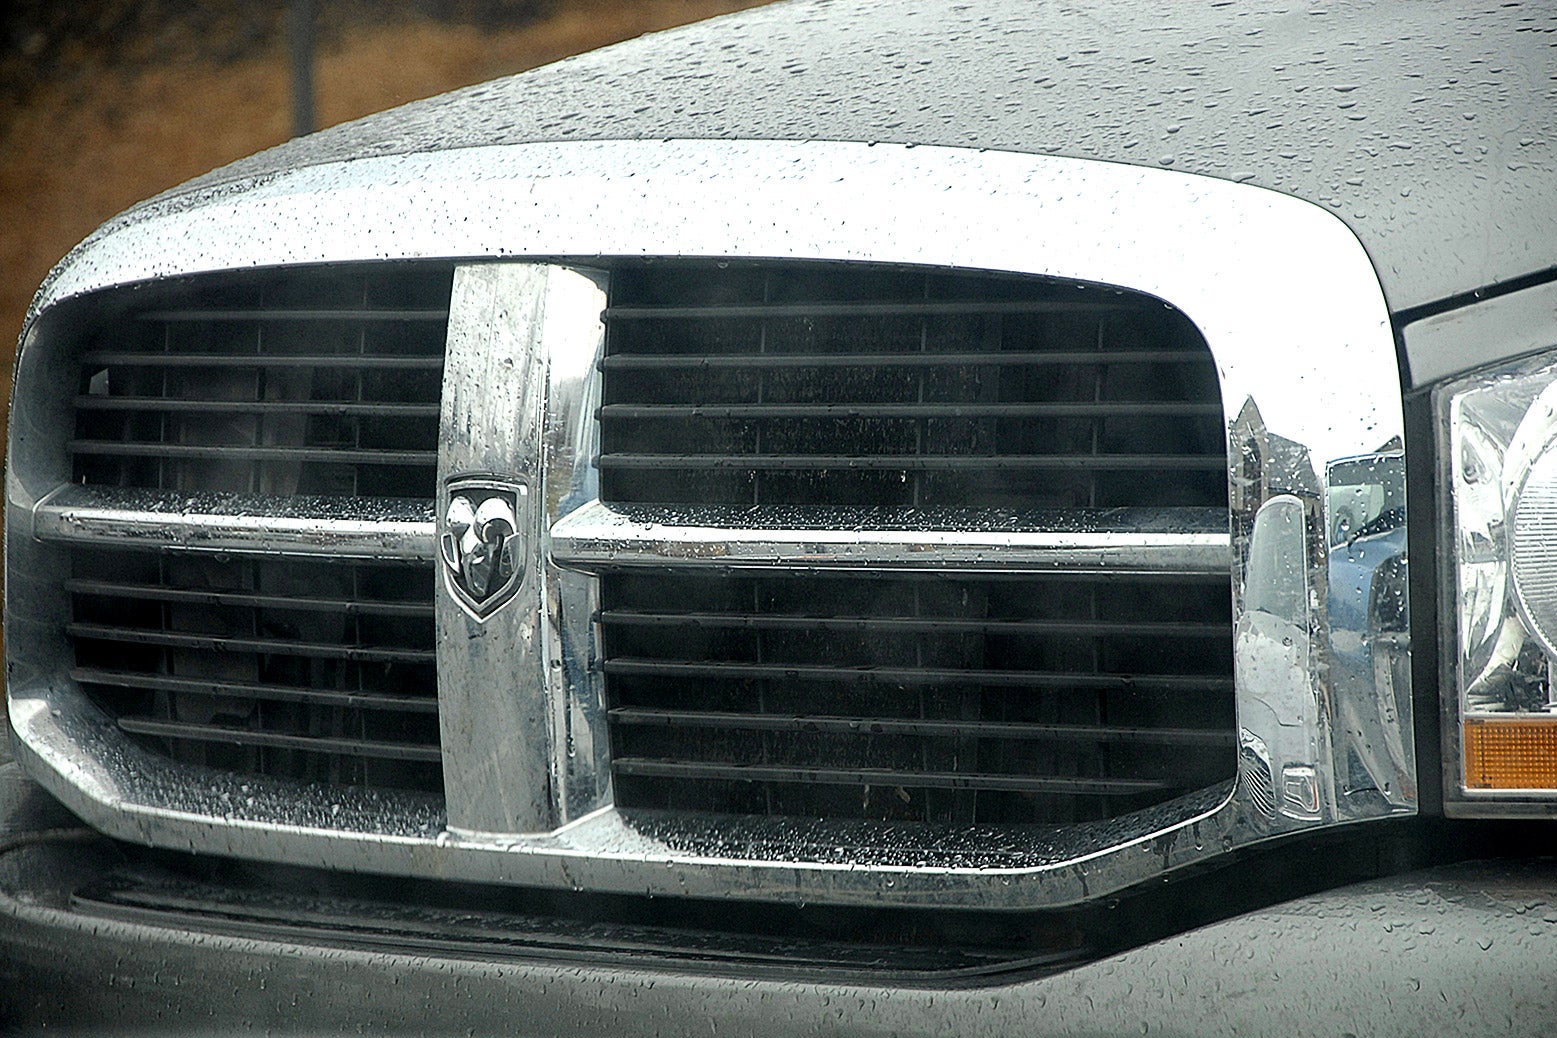 The grille of a Dodge Ram.